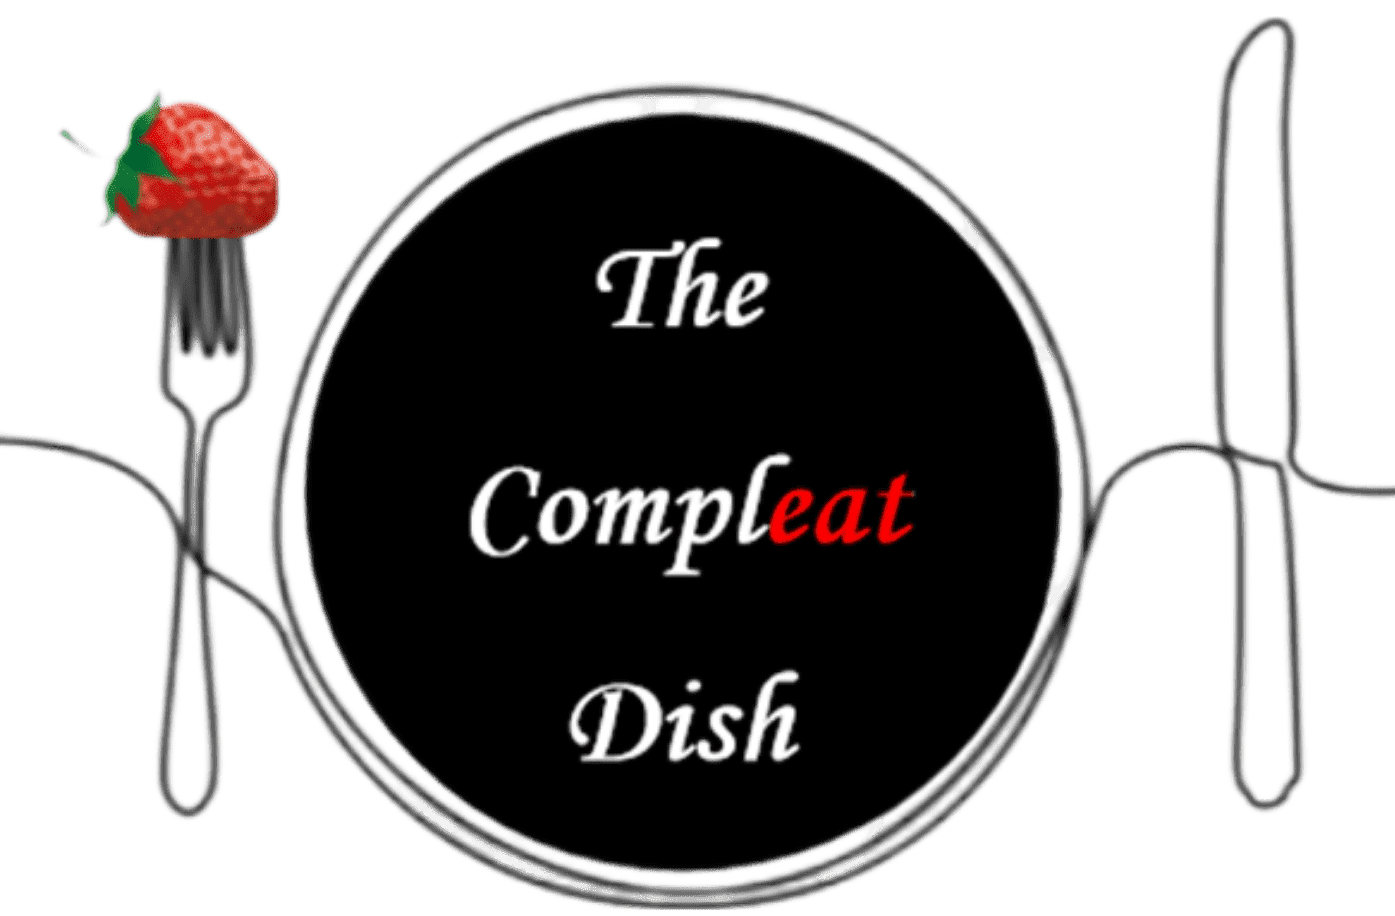 The Compleat Dish